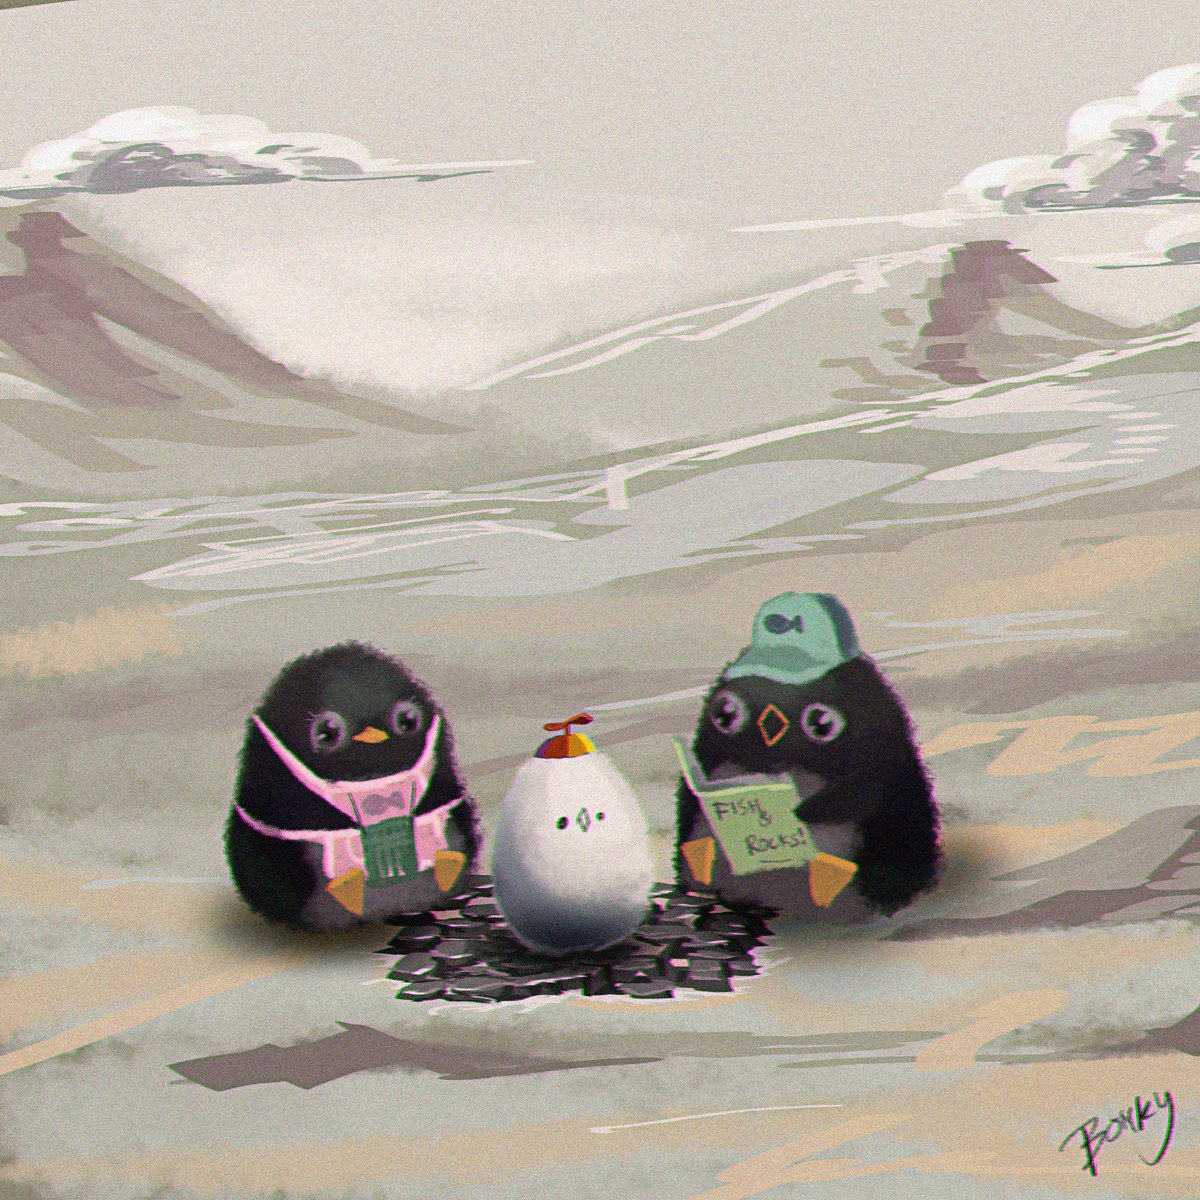 When dyou think he's ready to come out? I'm definitely taking him fishing with me!

#penguin #penguinart #csp #clipstudioart #artistontwitter #wholesome #kawaii #cuteart #painting #digitalpainting #art #artph